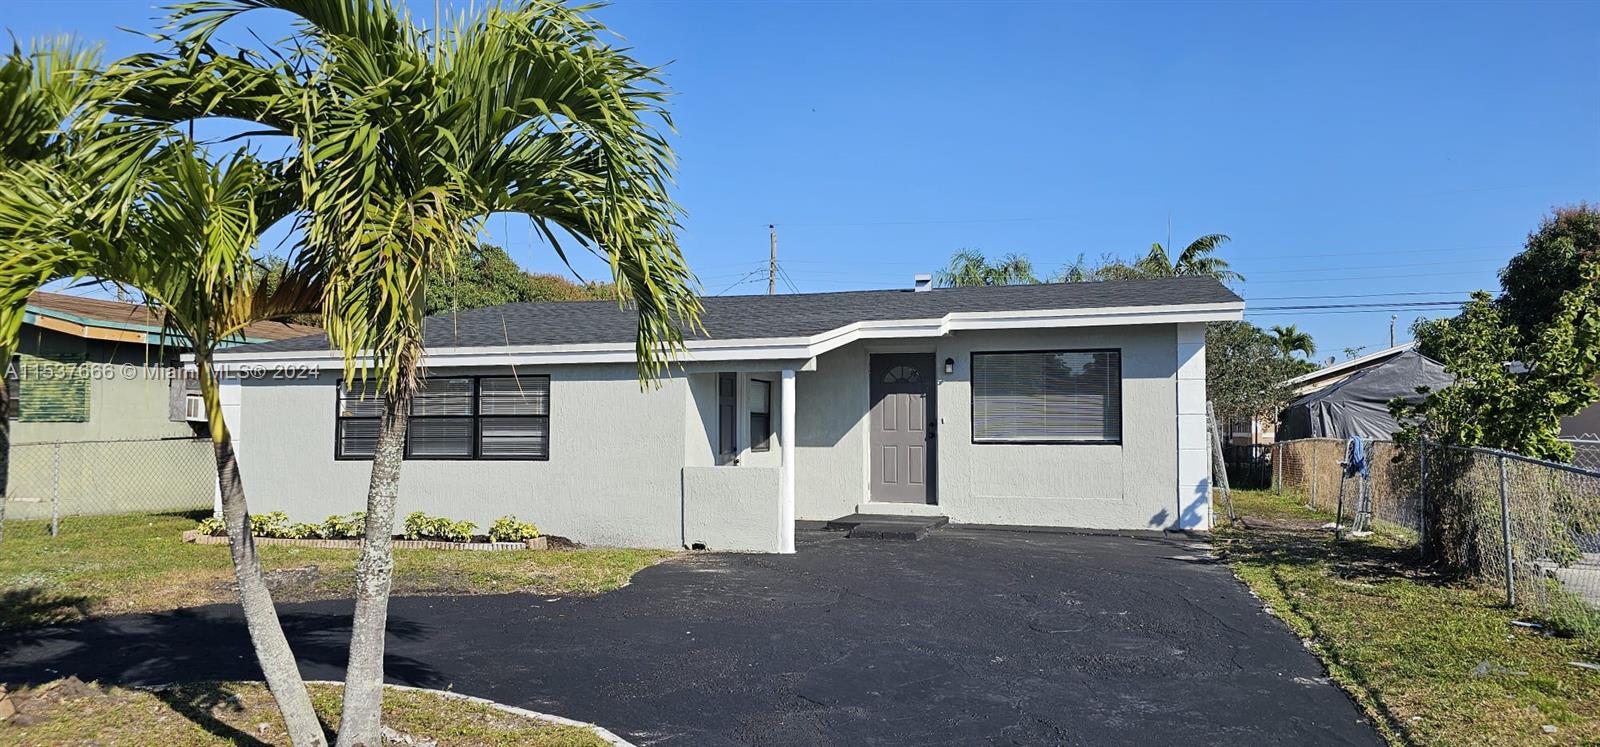 3021 Nw 7th Ct Ct, Fort Lauderdale, Broward County, Florida - 3 Bedrooms  
1 Bathrooms - 